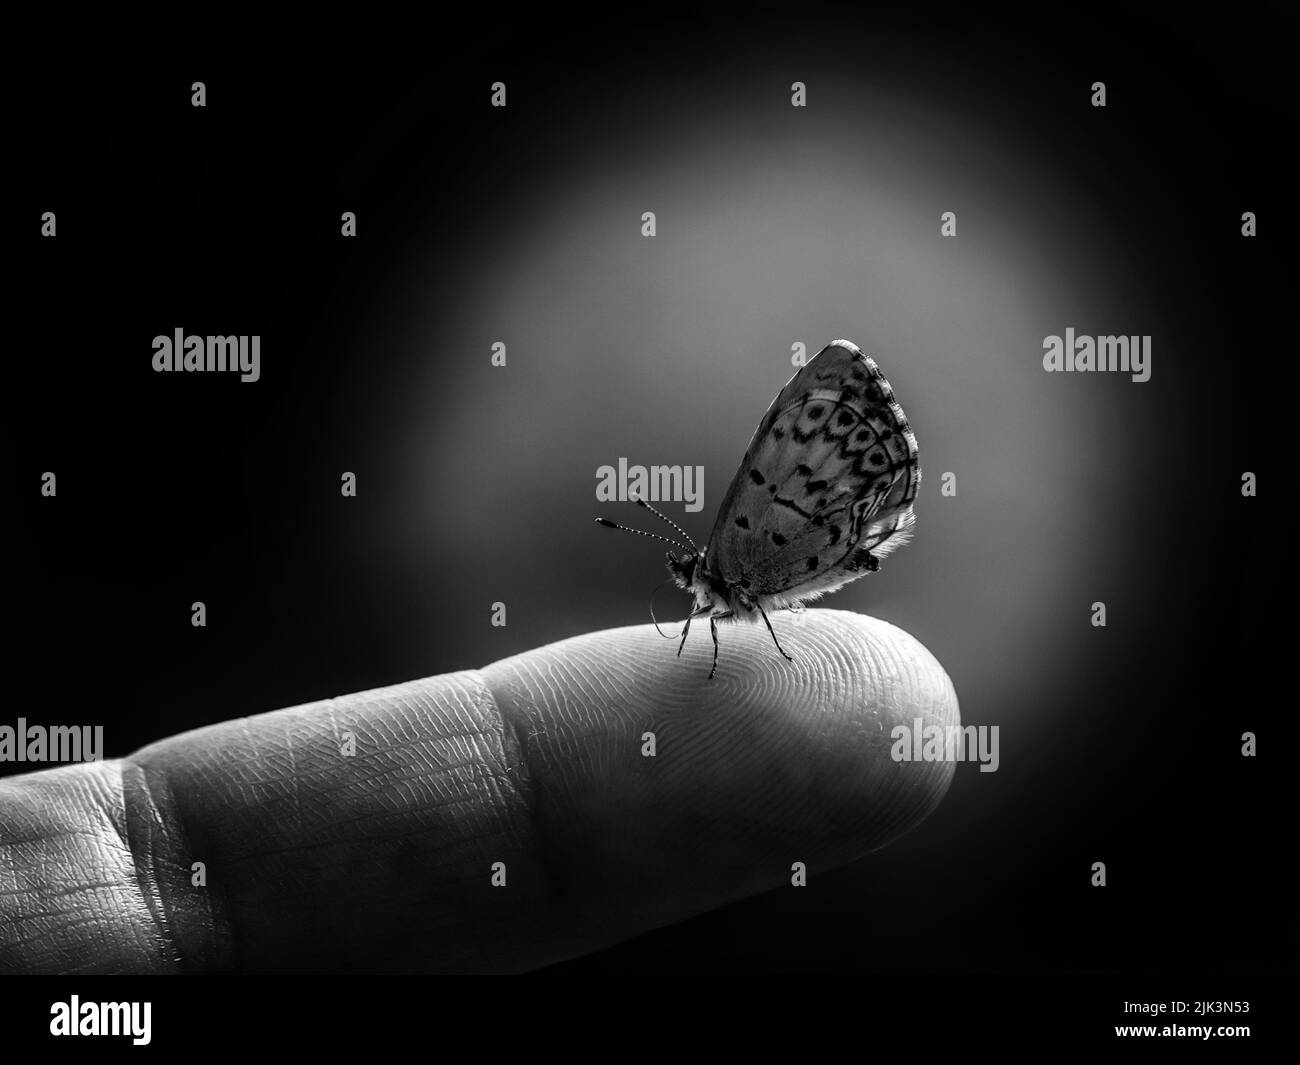 Close-up black and white portrait of a tiny spring azure butterfly that is resting on a human finger with a blurred background. Stock Photo